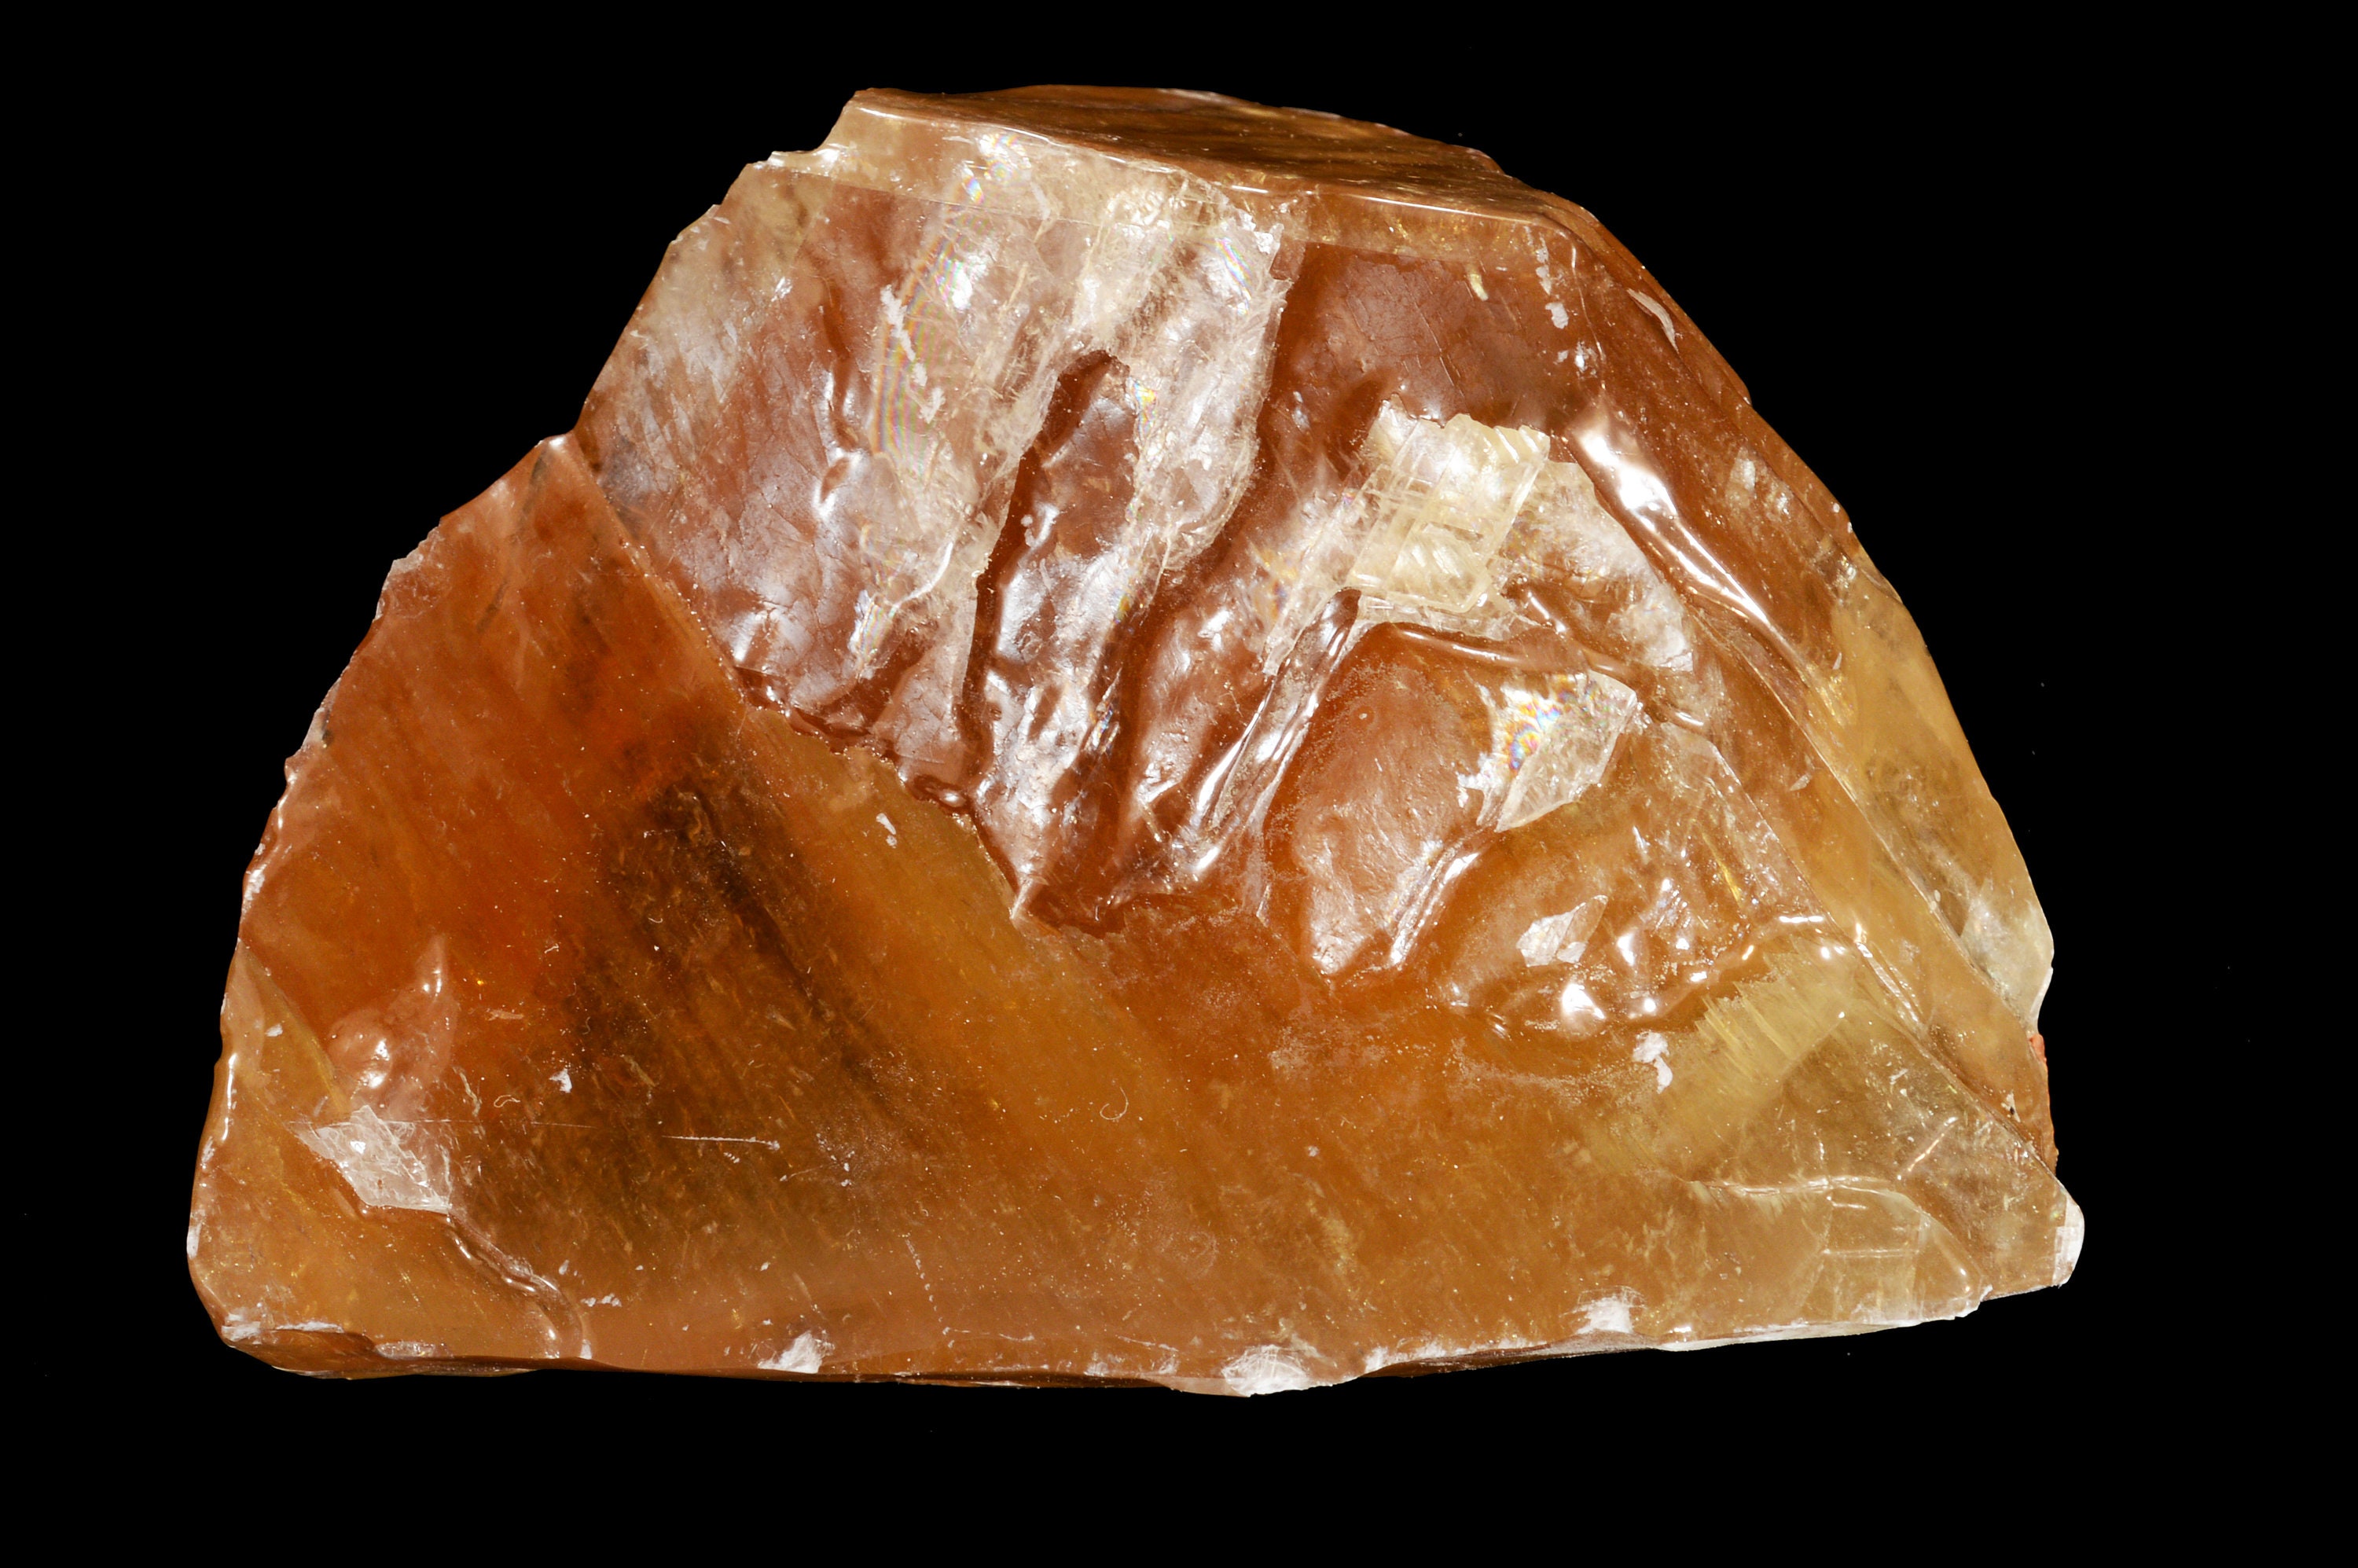 Amber Calcite 3 8-12 Oz Crystal Large Raw Rocks and Minerals Sacral Chakra Healing Crystals and Stones Natural Specimen xx